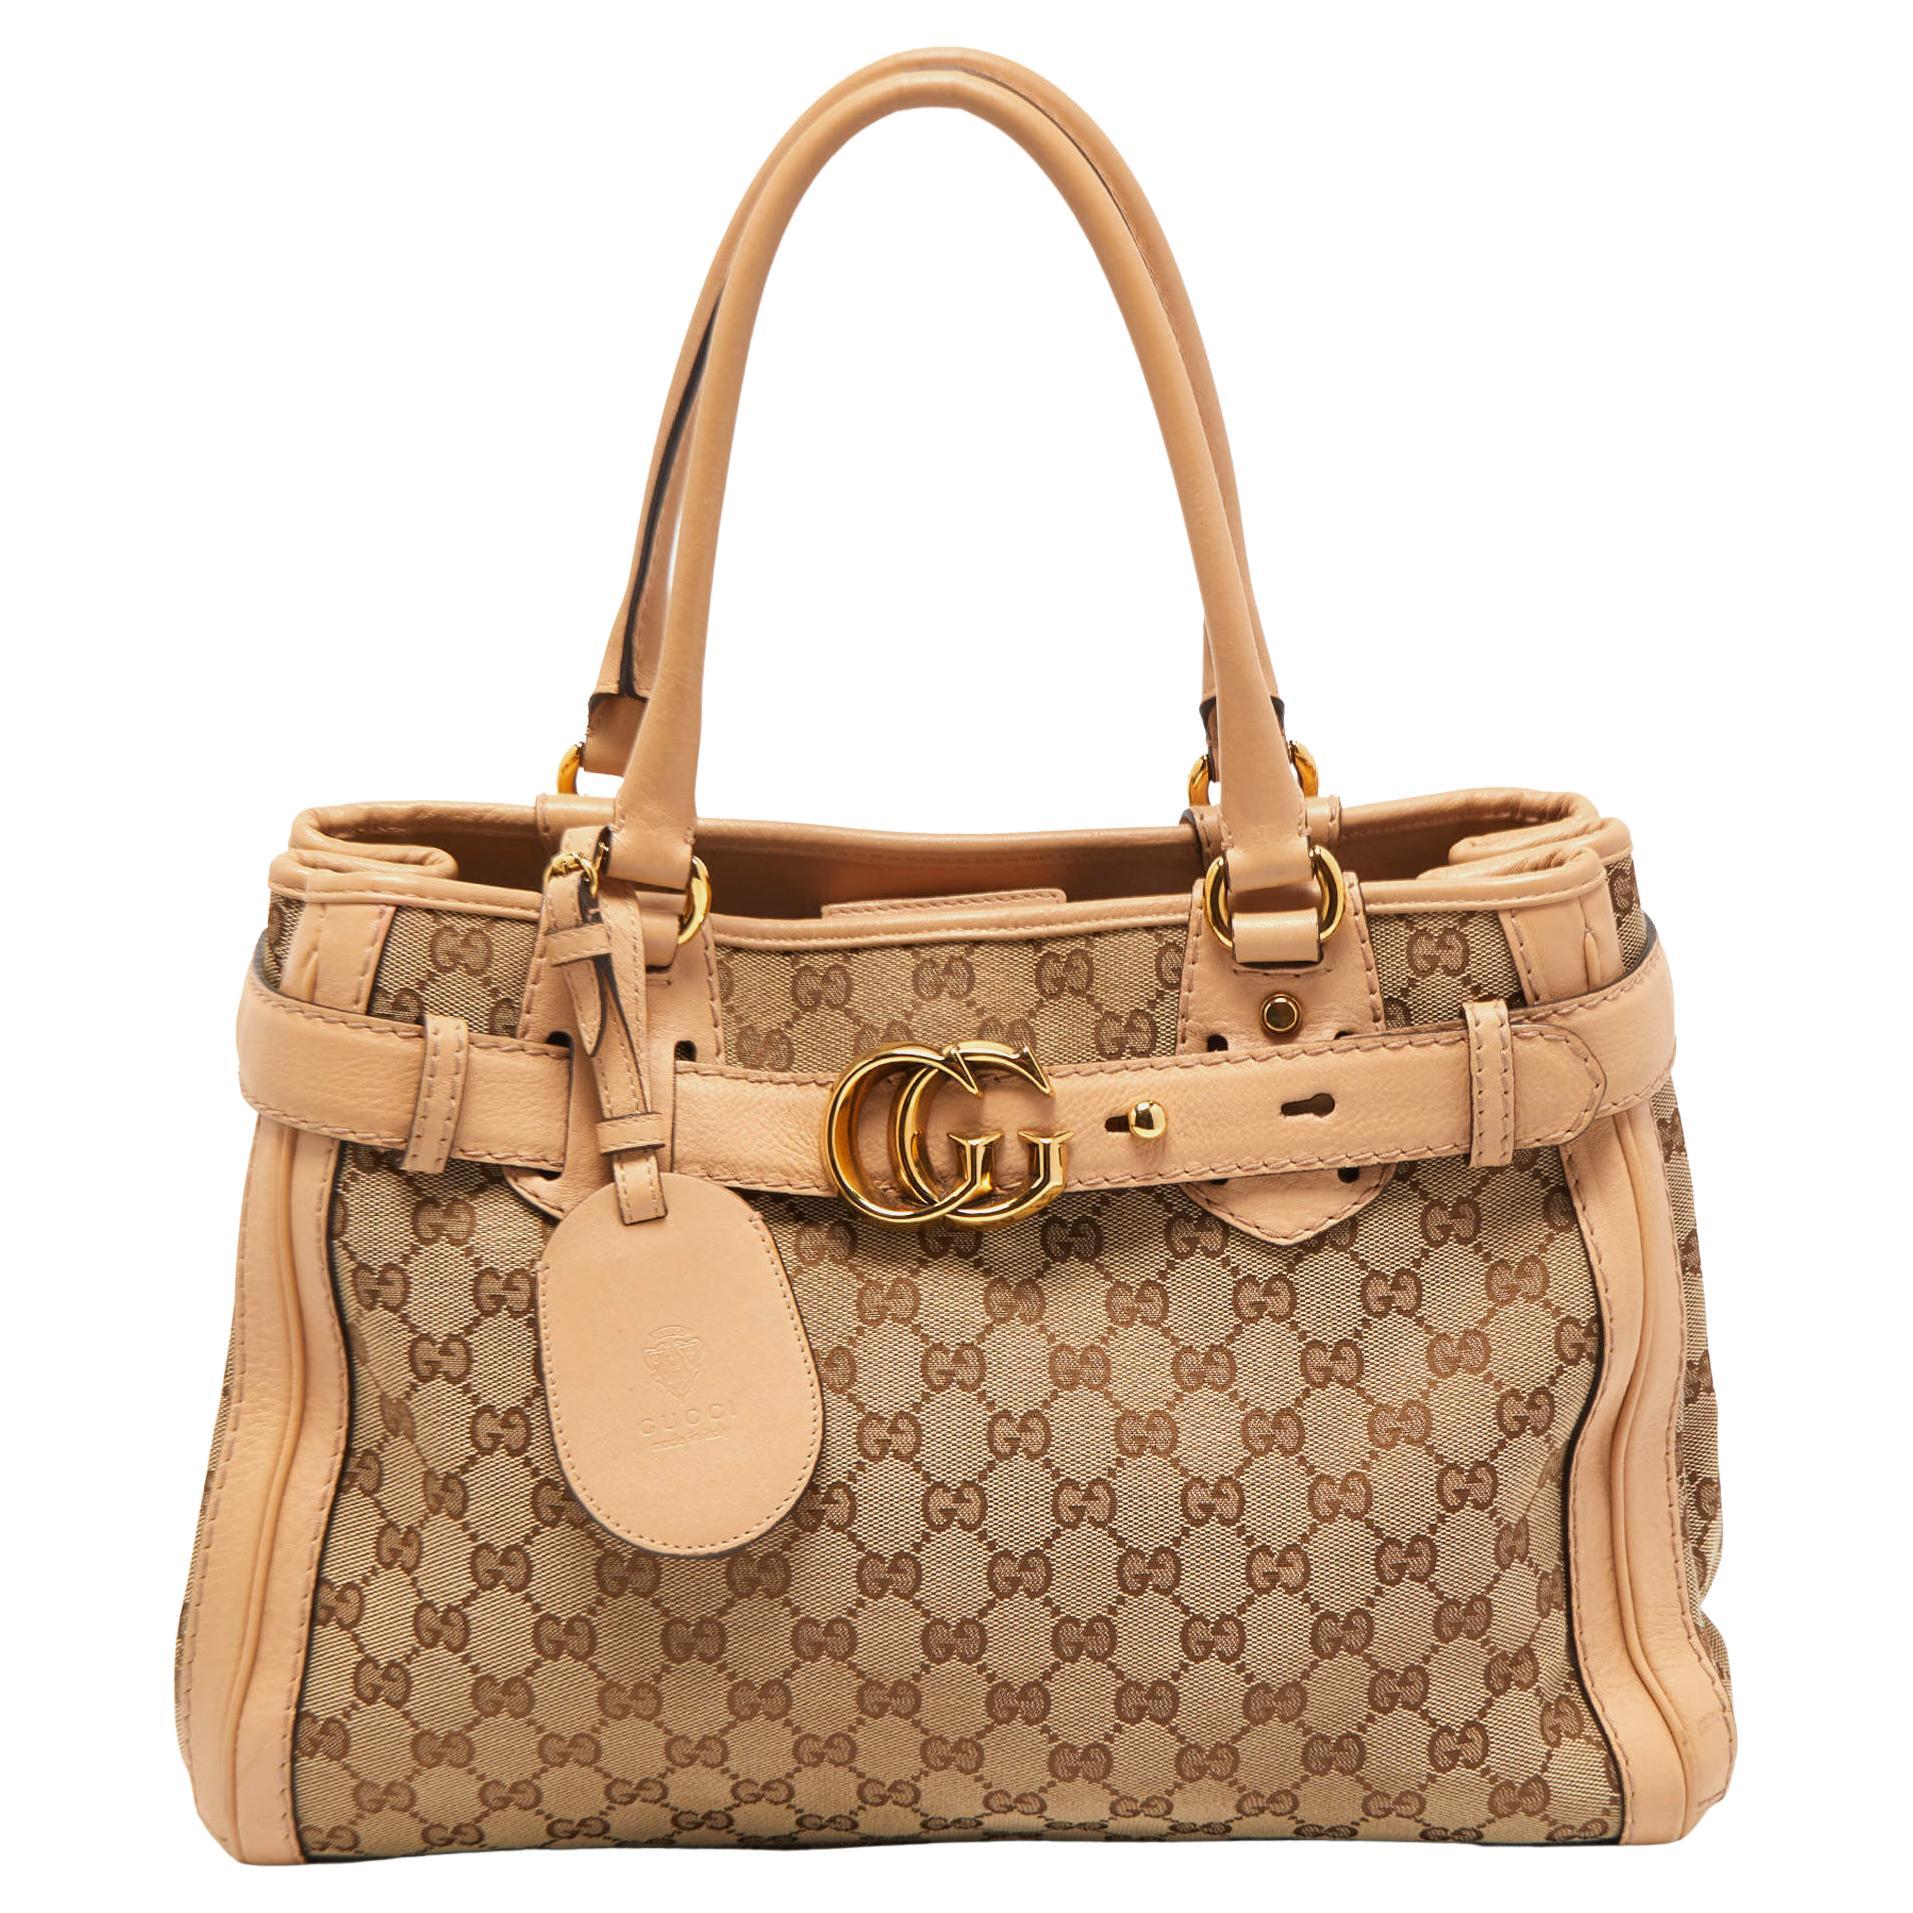 Gucci Beige GG Canvas and Leather Medium Running Tote